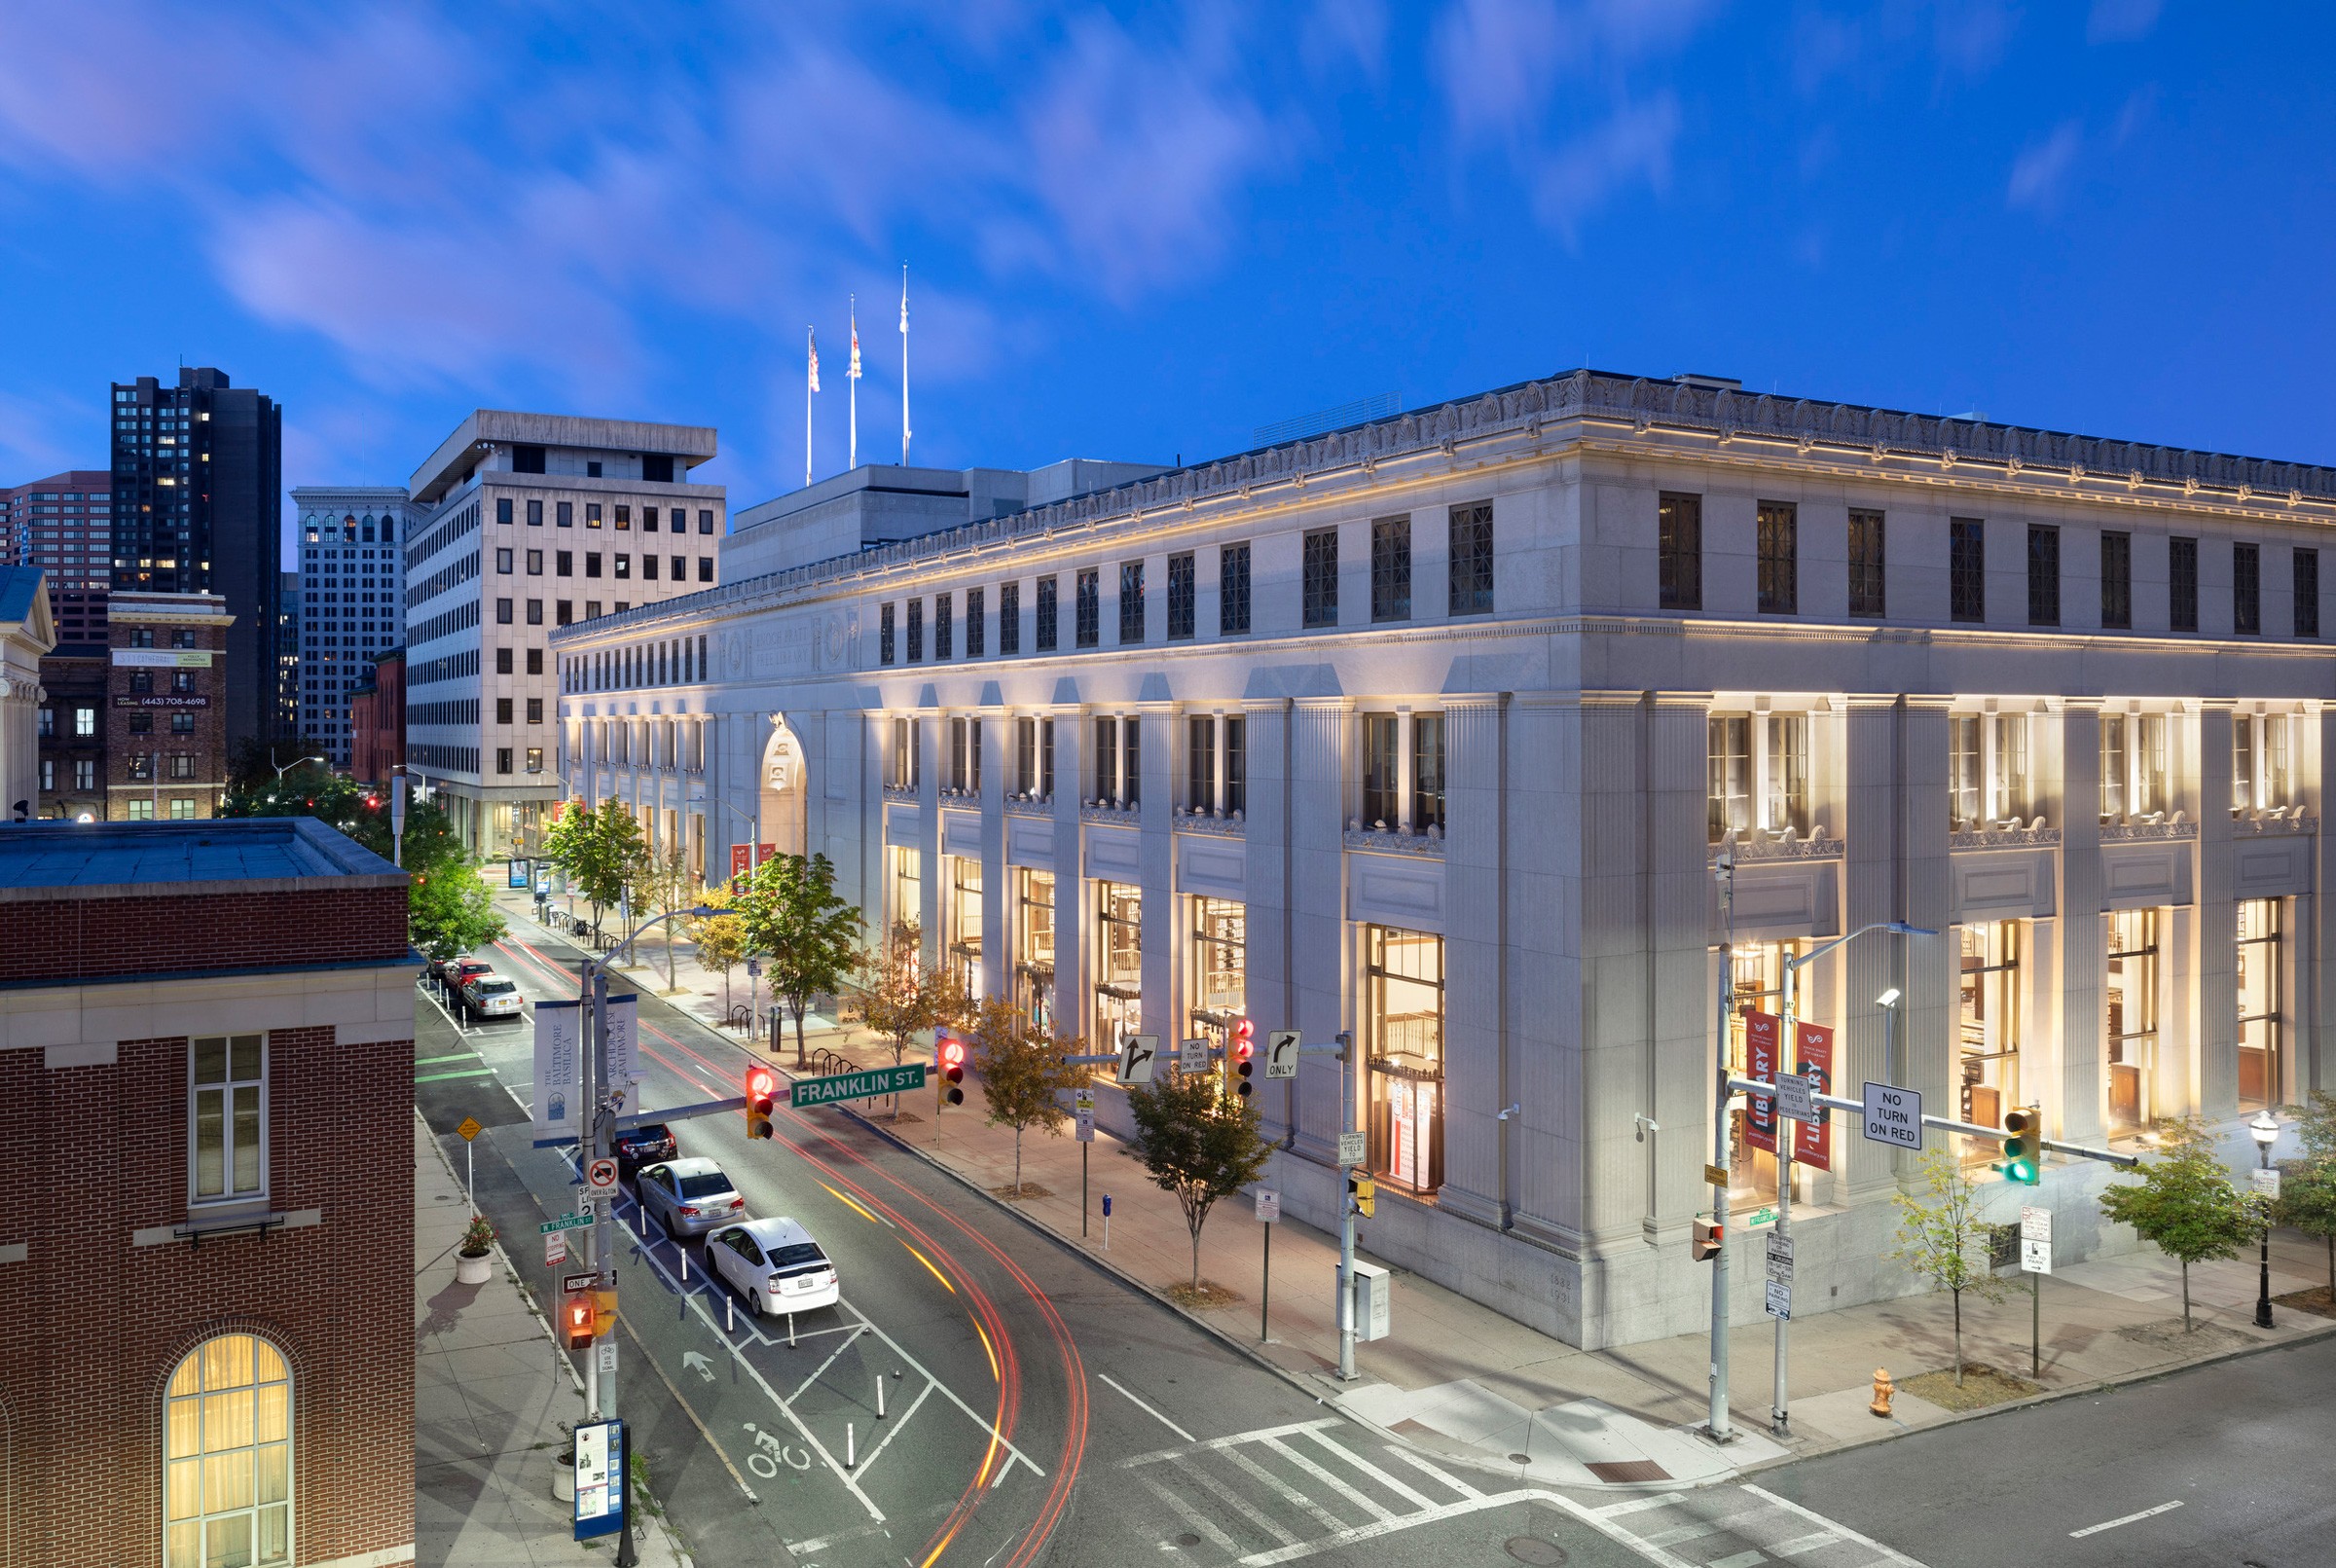 Exterior view at night of the Enoch Pratt Free Library Central Library Renovation